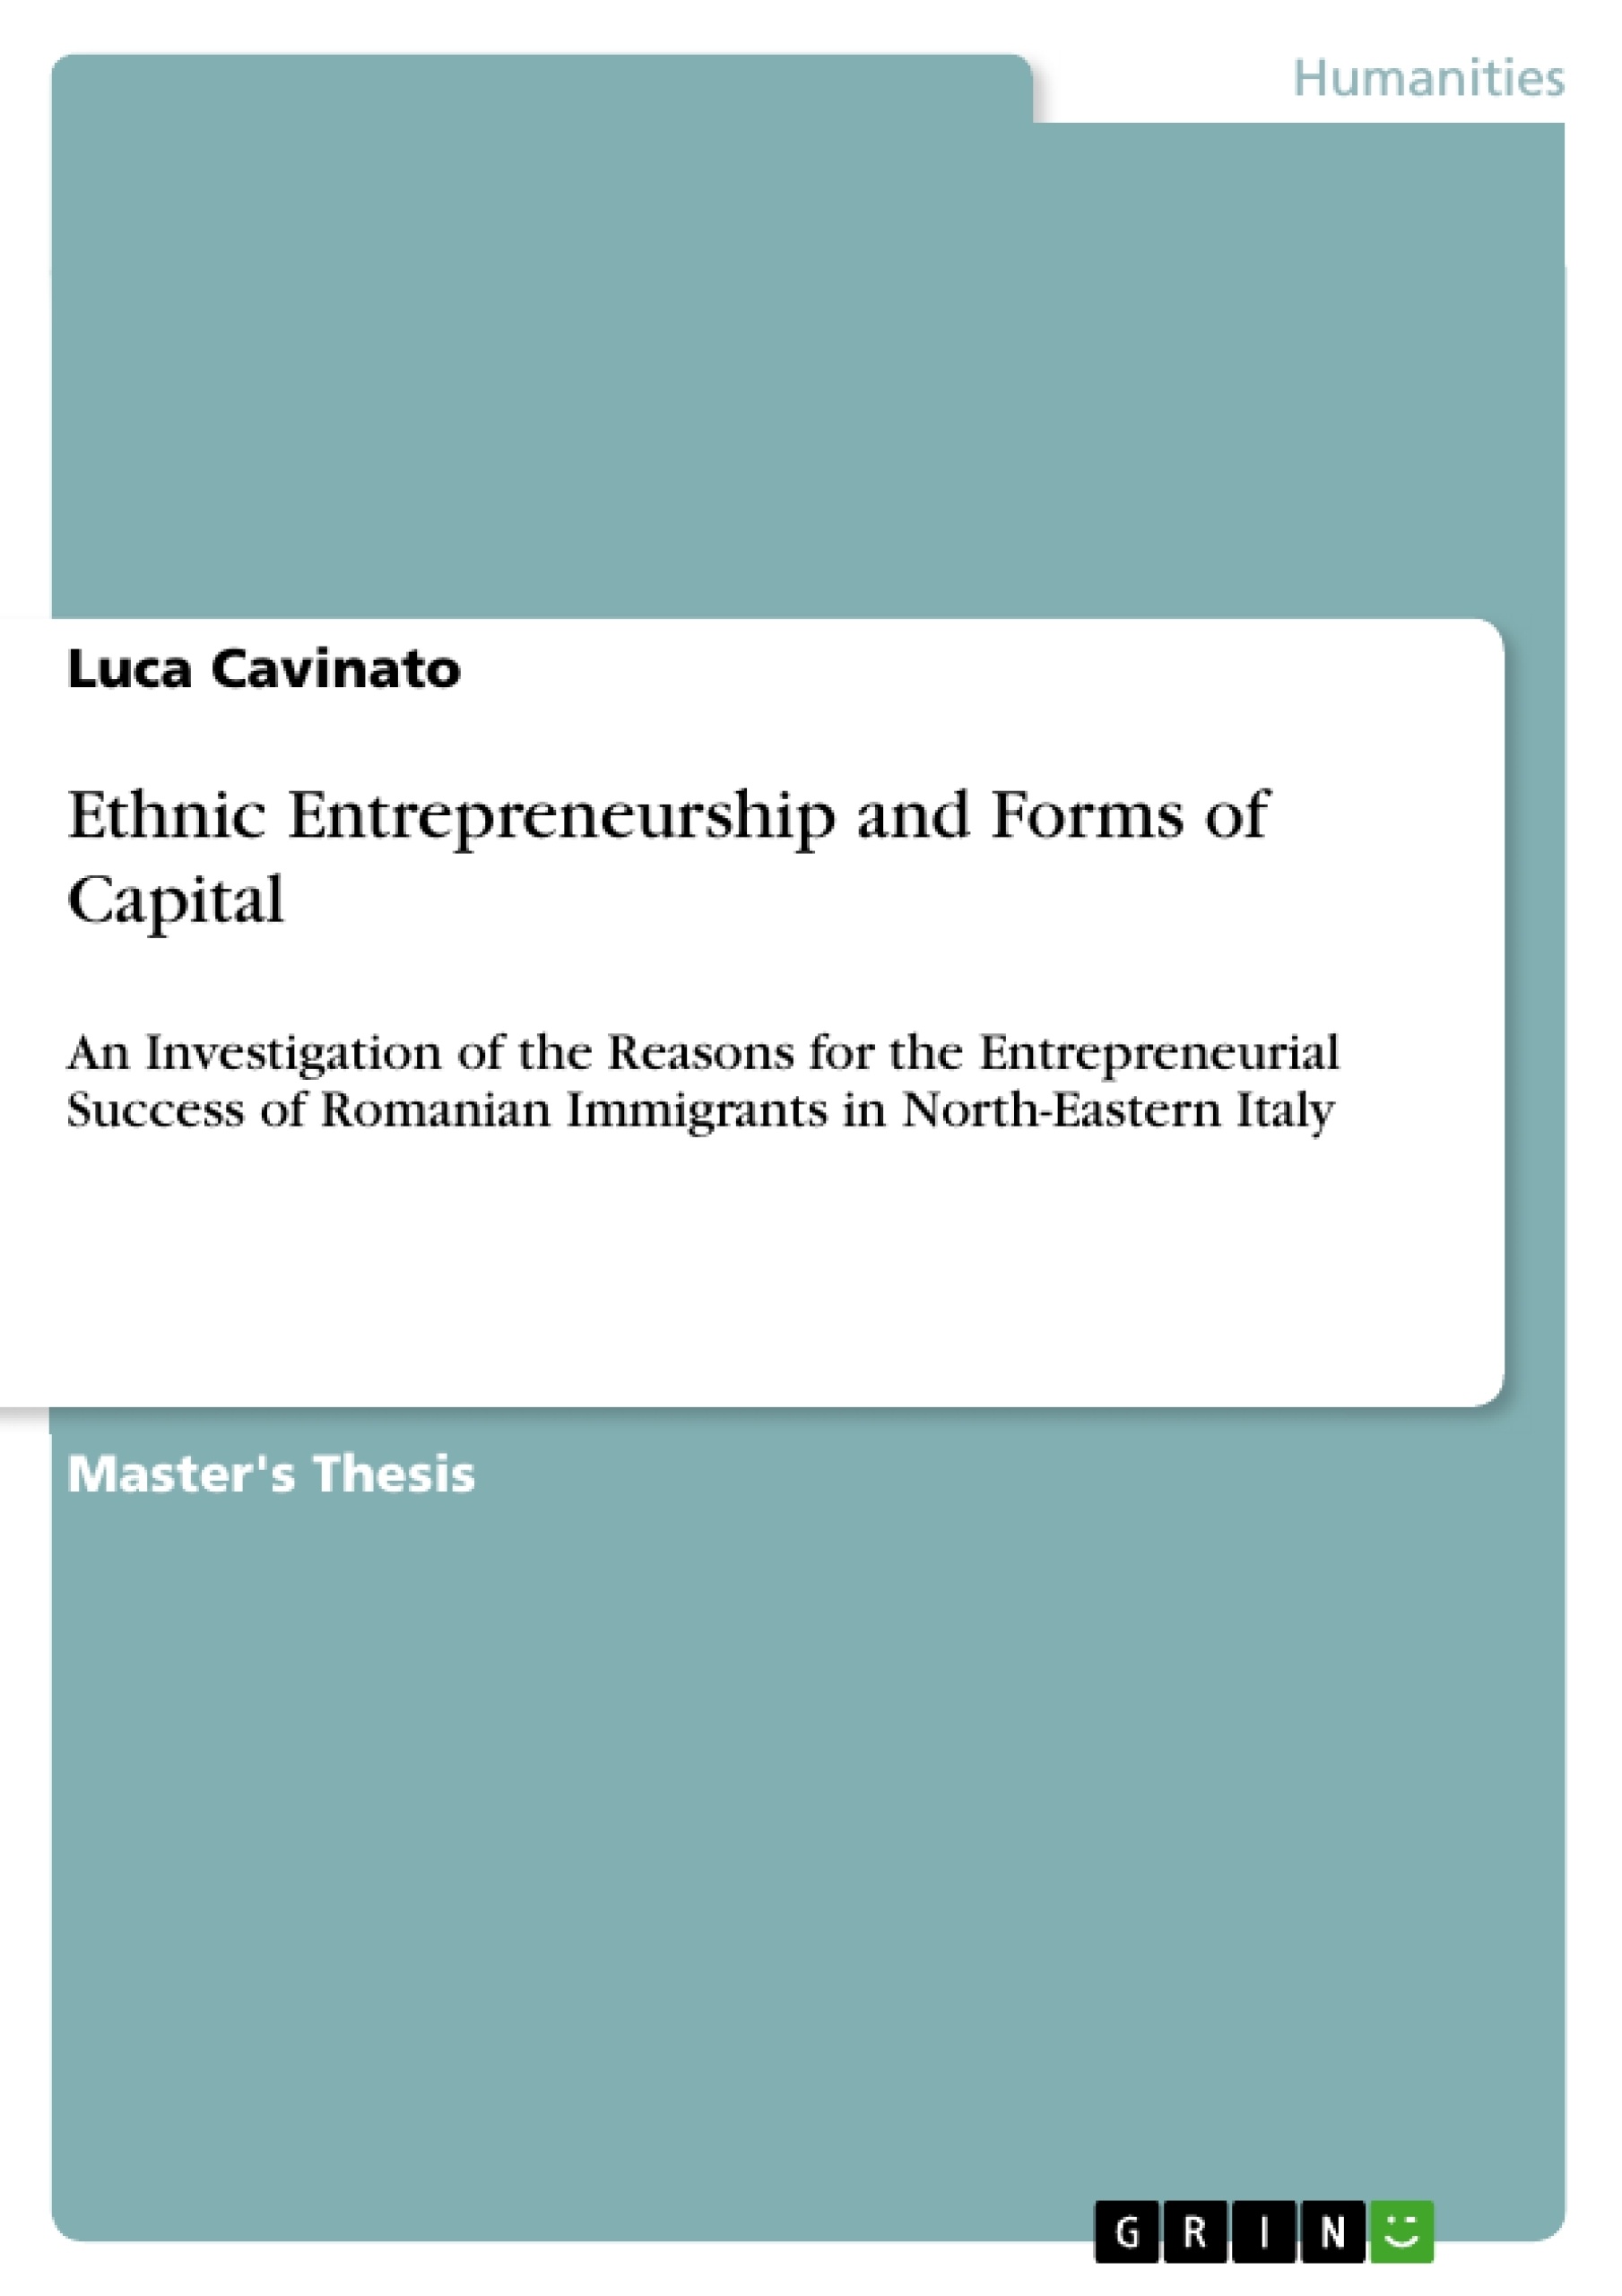 Titre: Ethnic Entrepreneurship and Forms of Capital